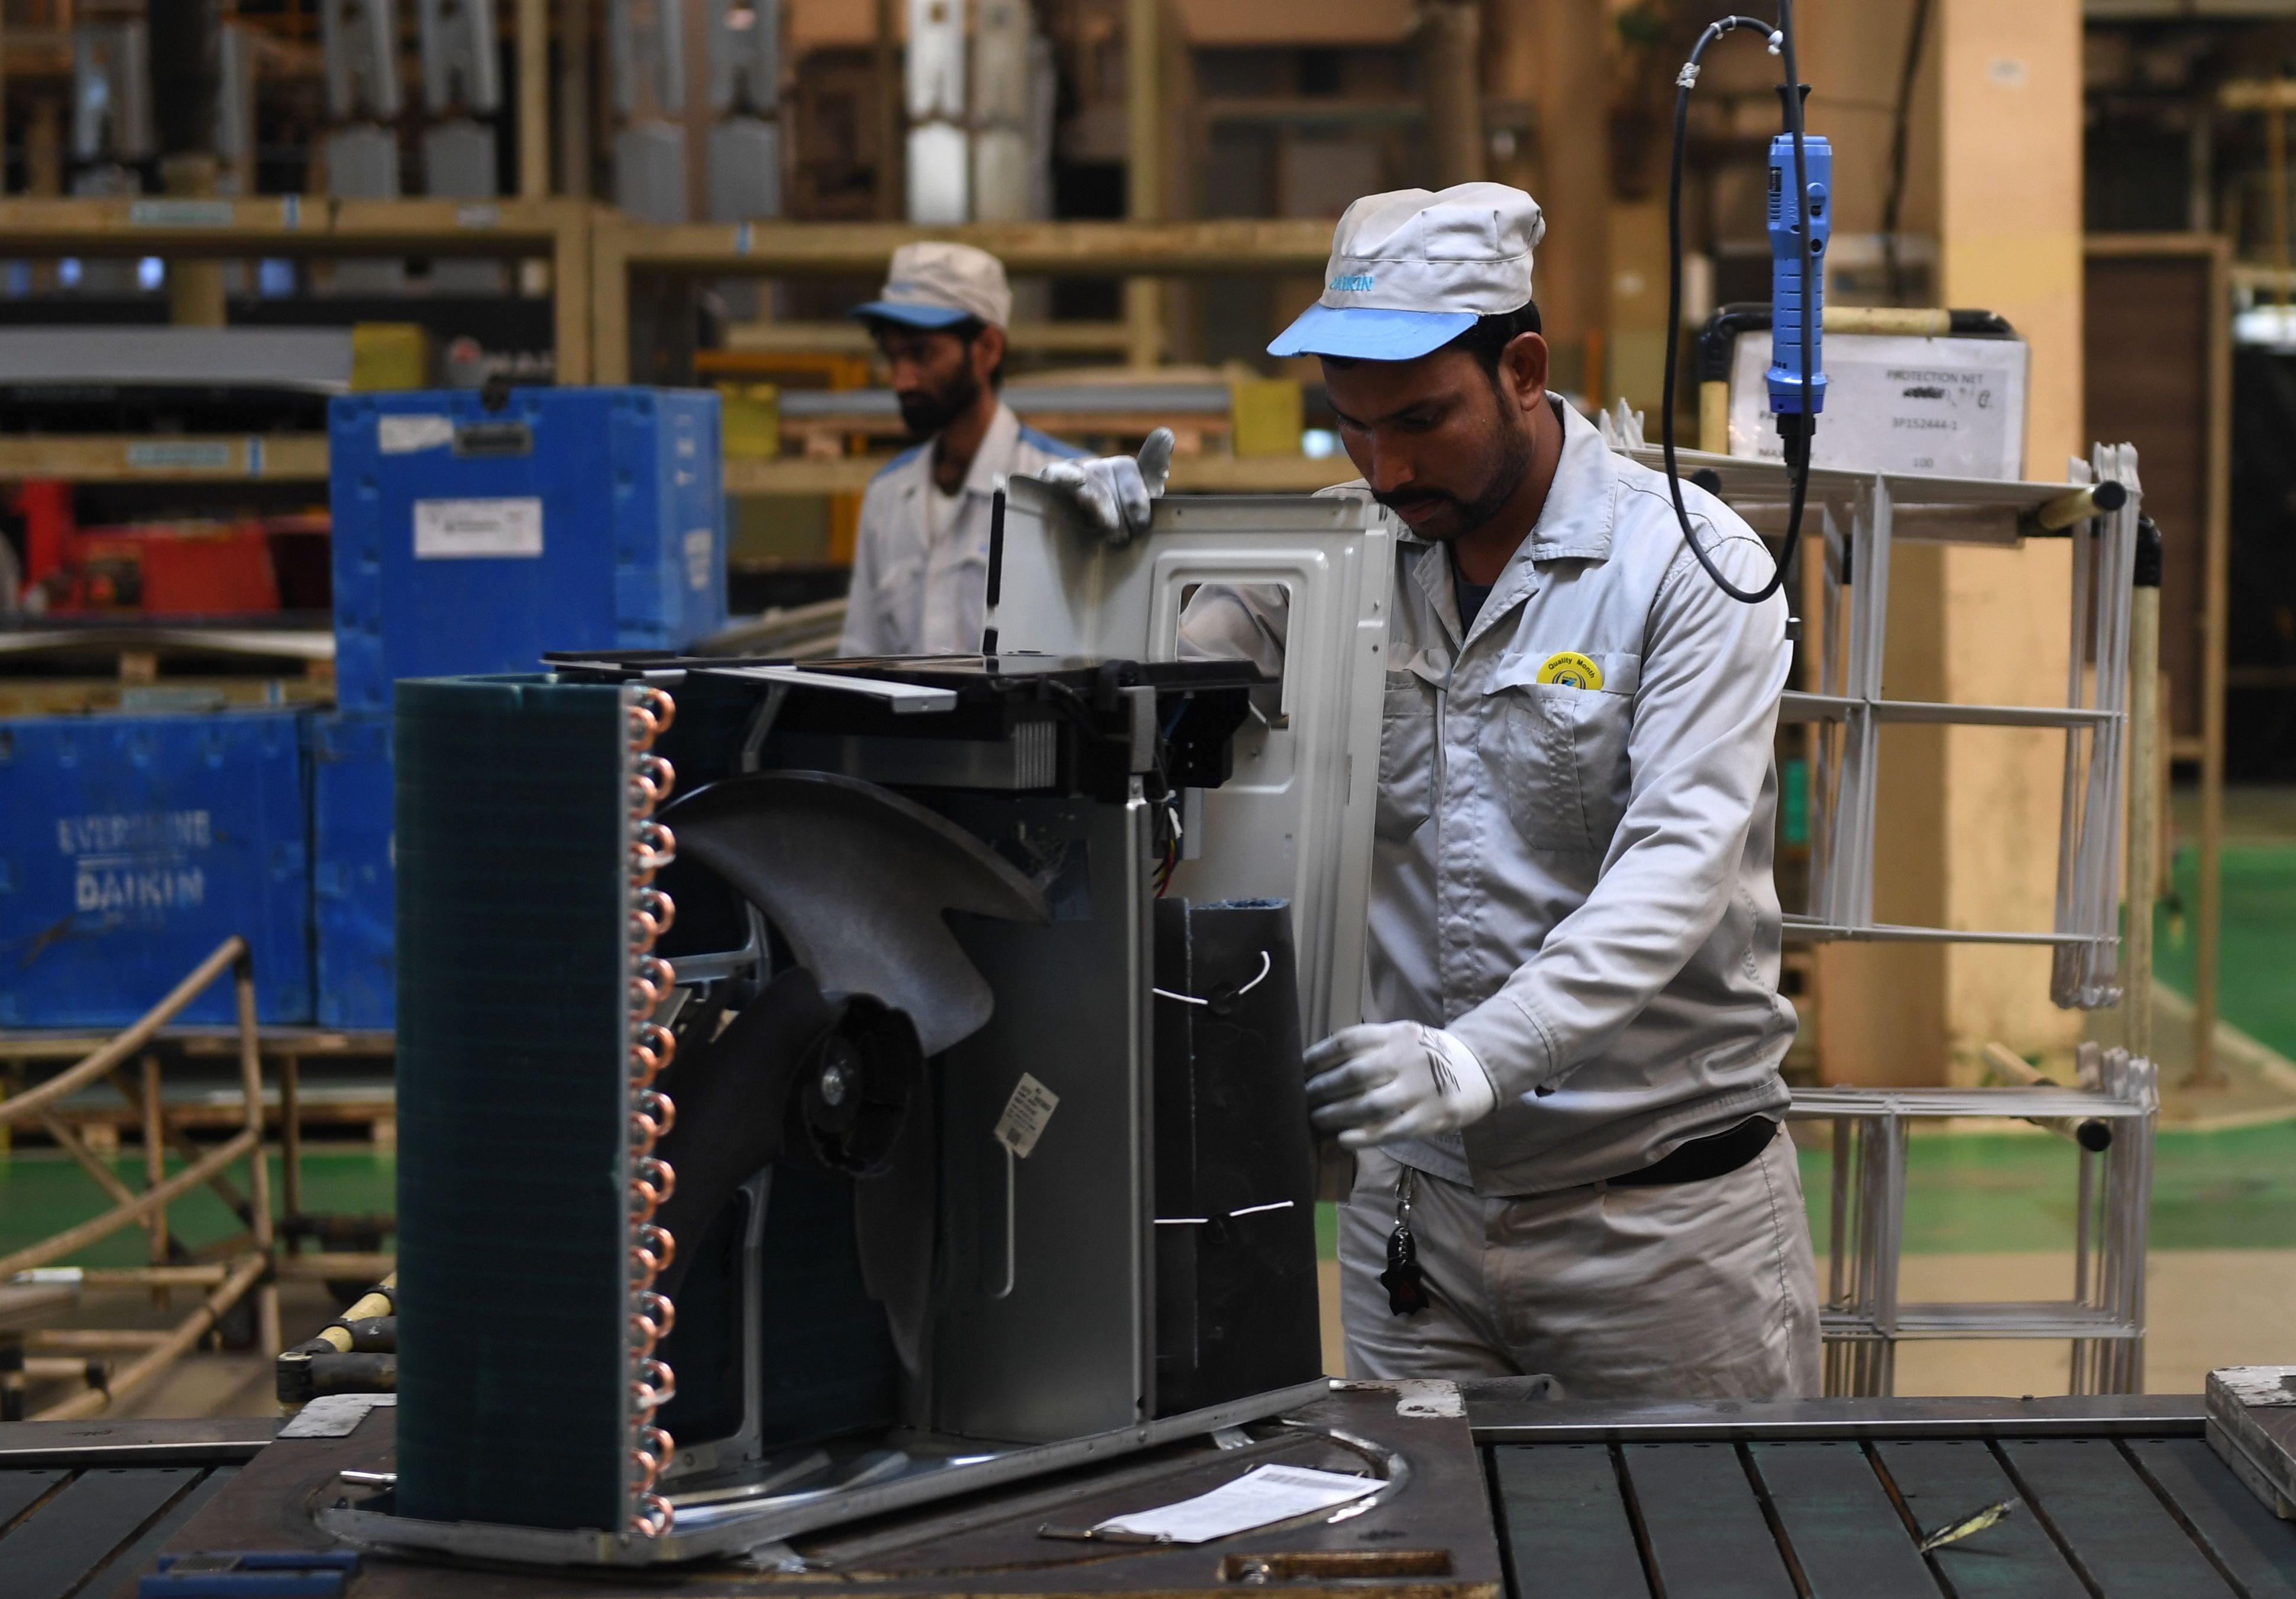 Workers on the production line at the Daikin air-conditioning plant in Neemrana, southwest of New Delhi. According to a Deloitte survey, India is expected to be one of the world’s top five manufacturing nations by 2020. Photo: AFP